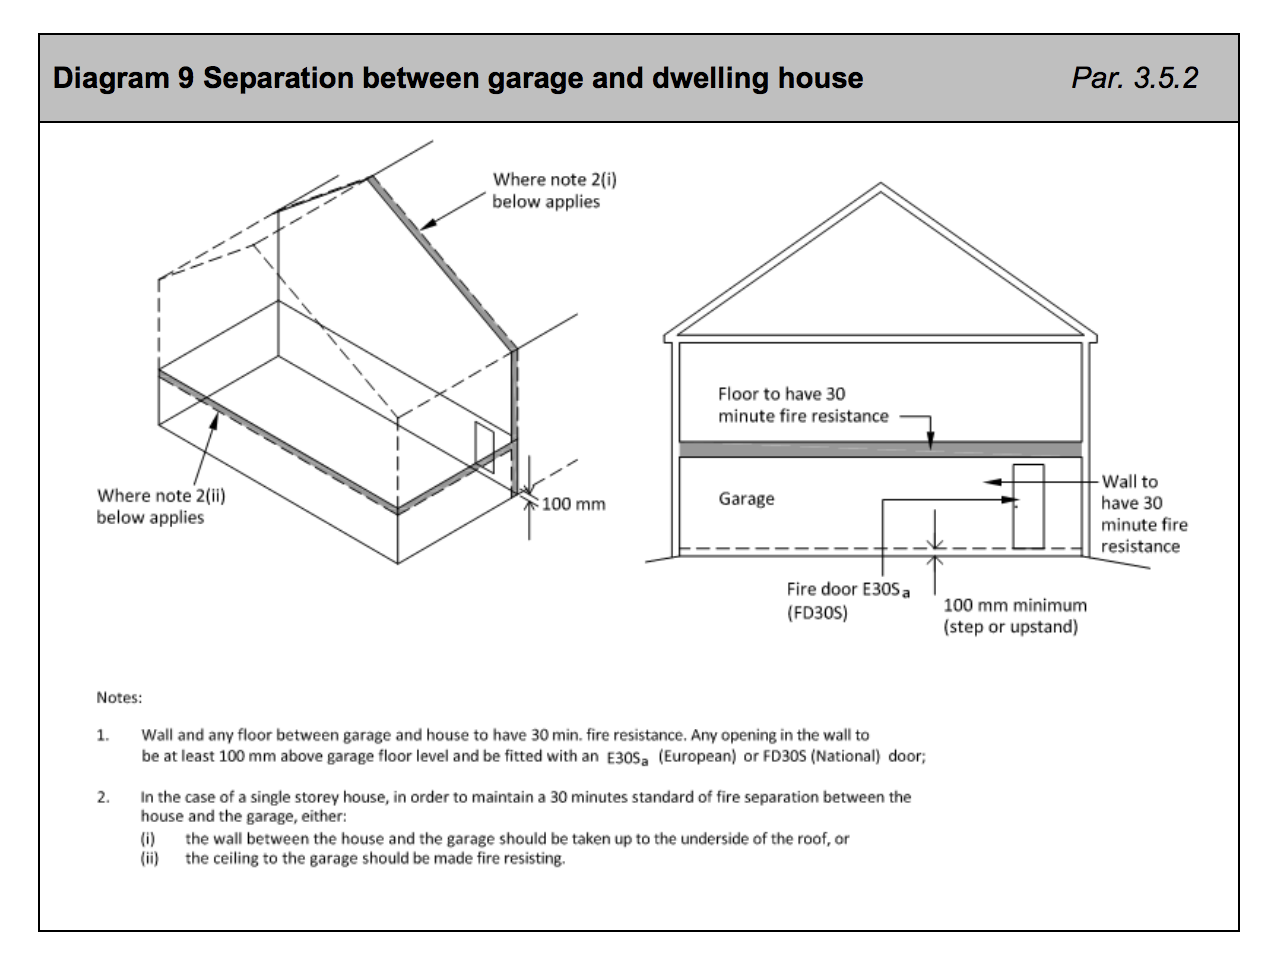 Diagram HB9 - Separation between garage and dwelling house - Extract from TGD B Vol. 2